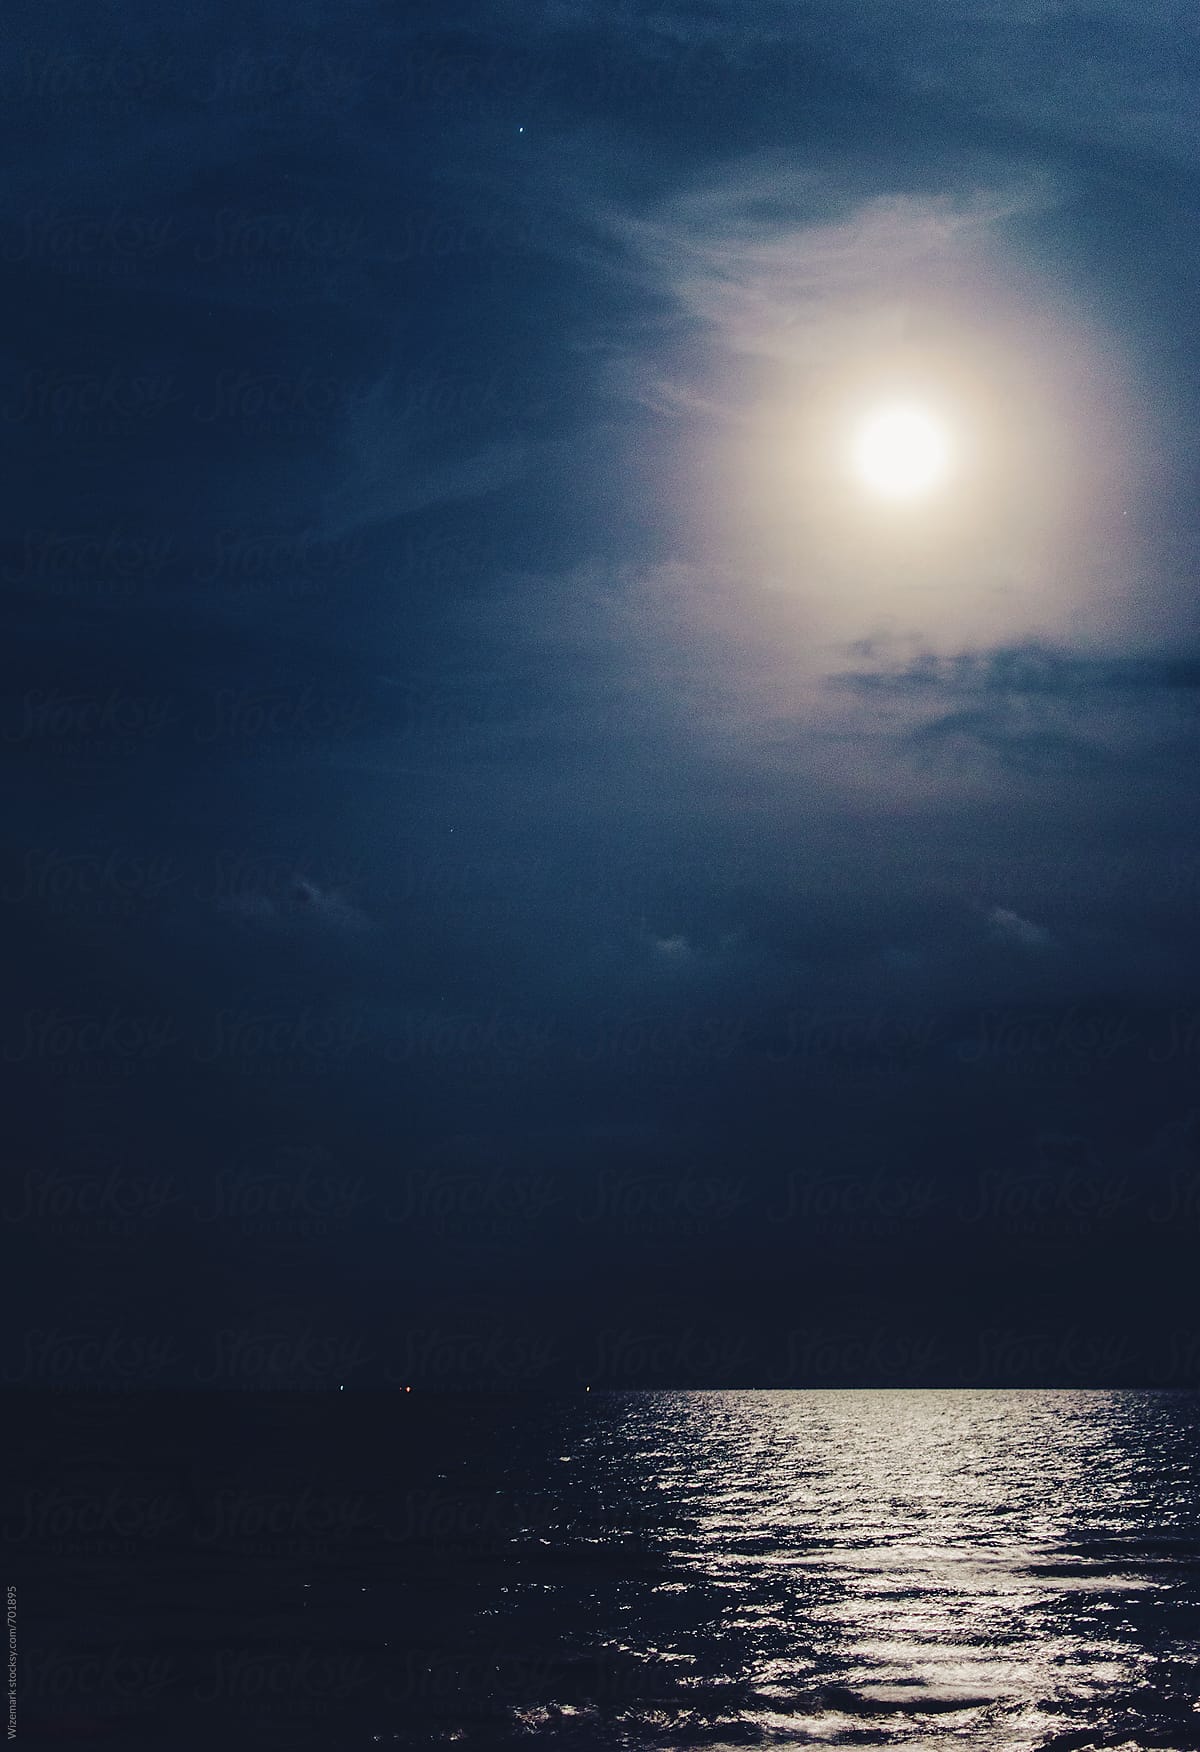 Full moon with the reflected light on the sea surface background